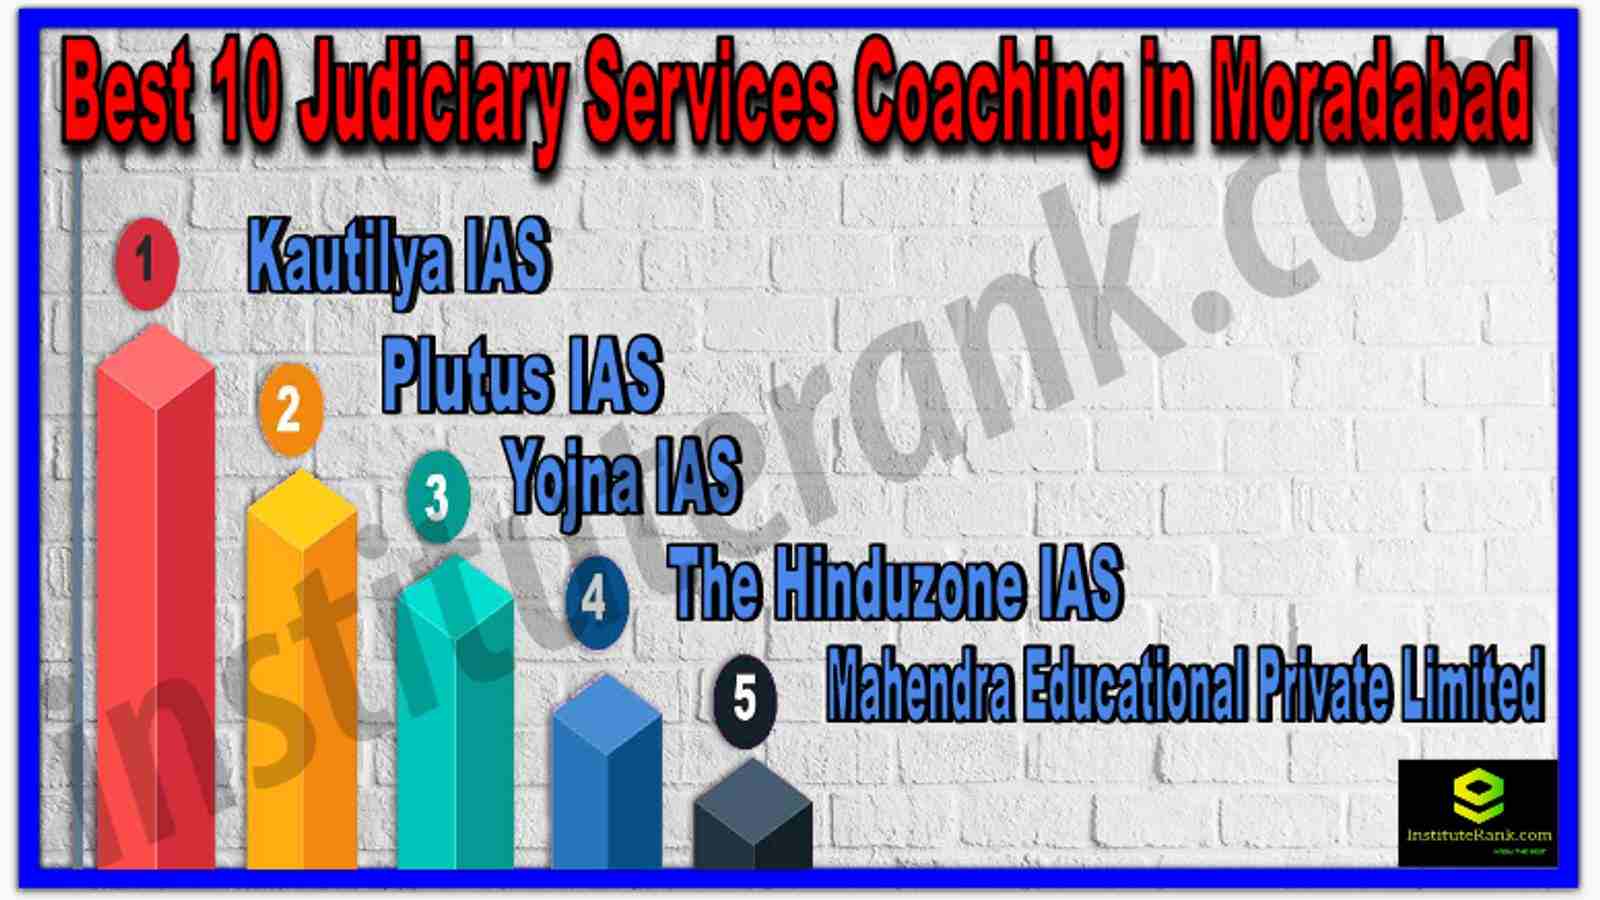 Best 10 Judiciary Services Coaching in Moradabad